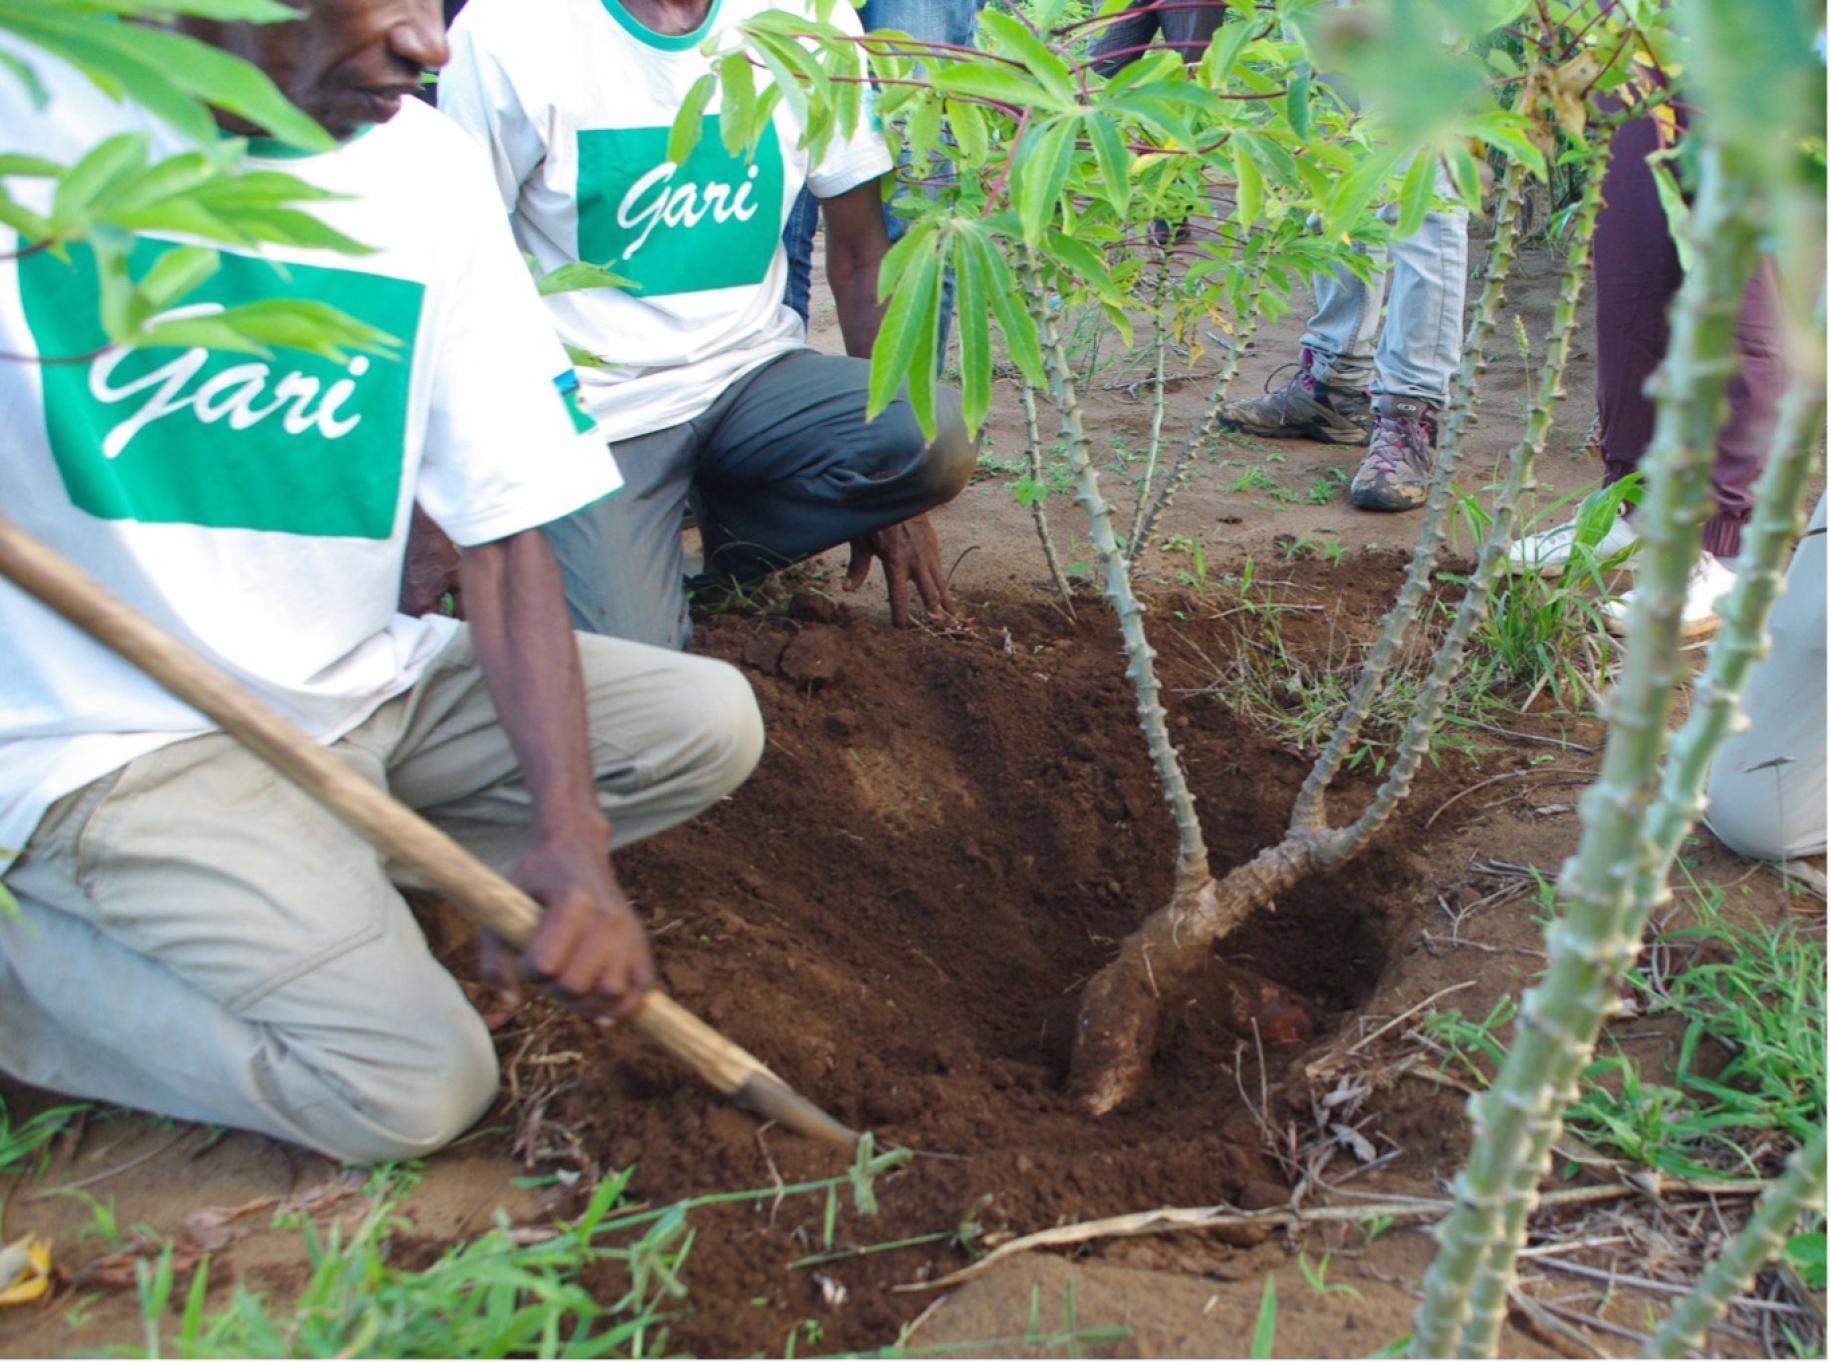 Two men in a white shirt are sowing a plant in the ground with farming tools